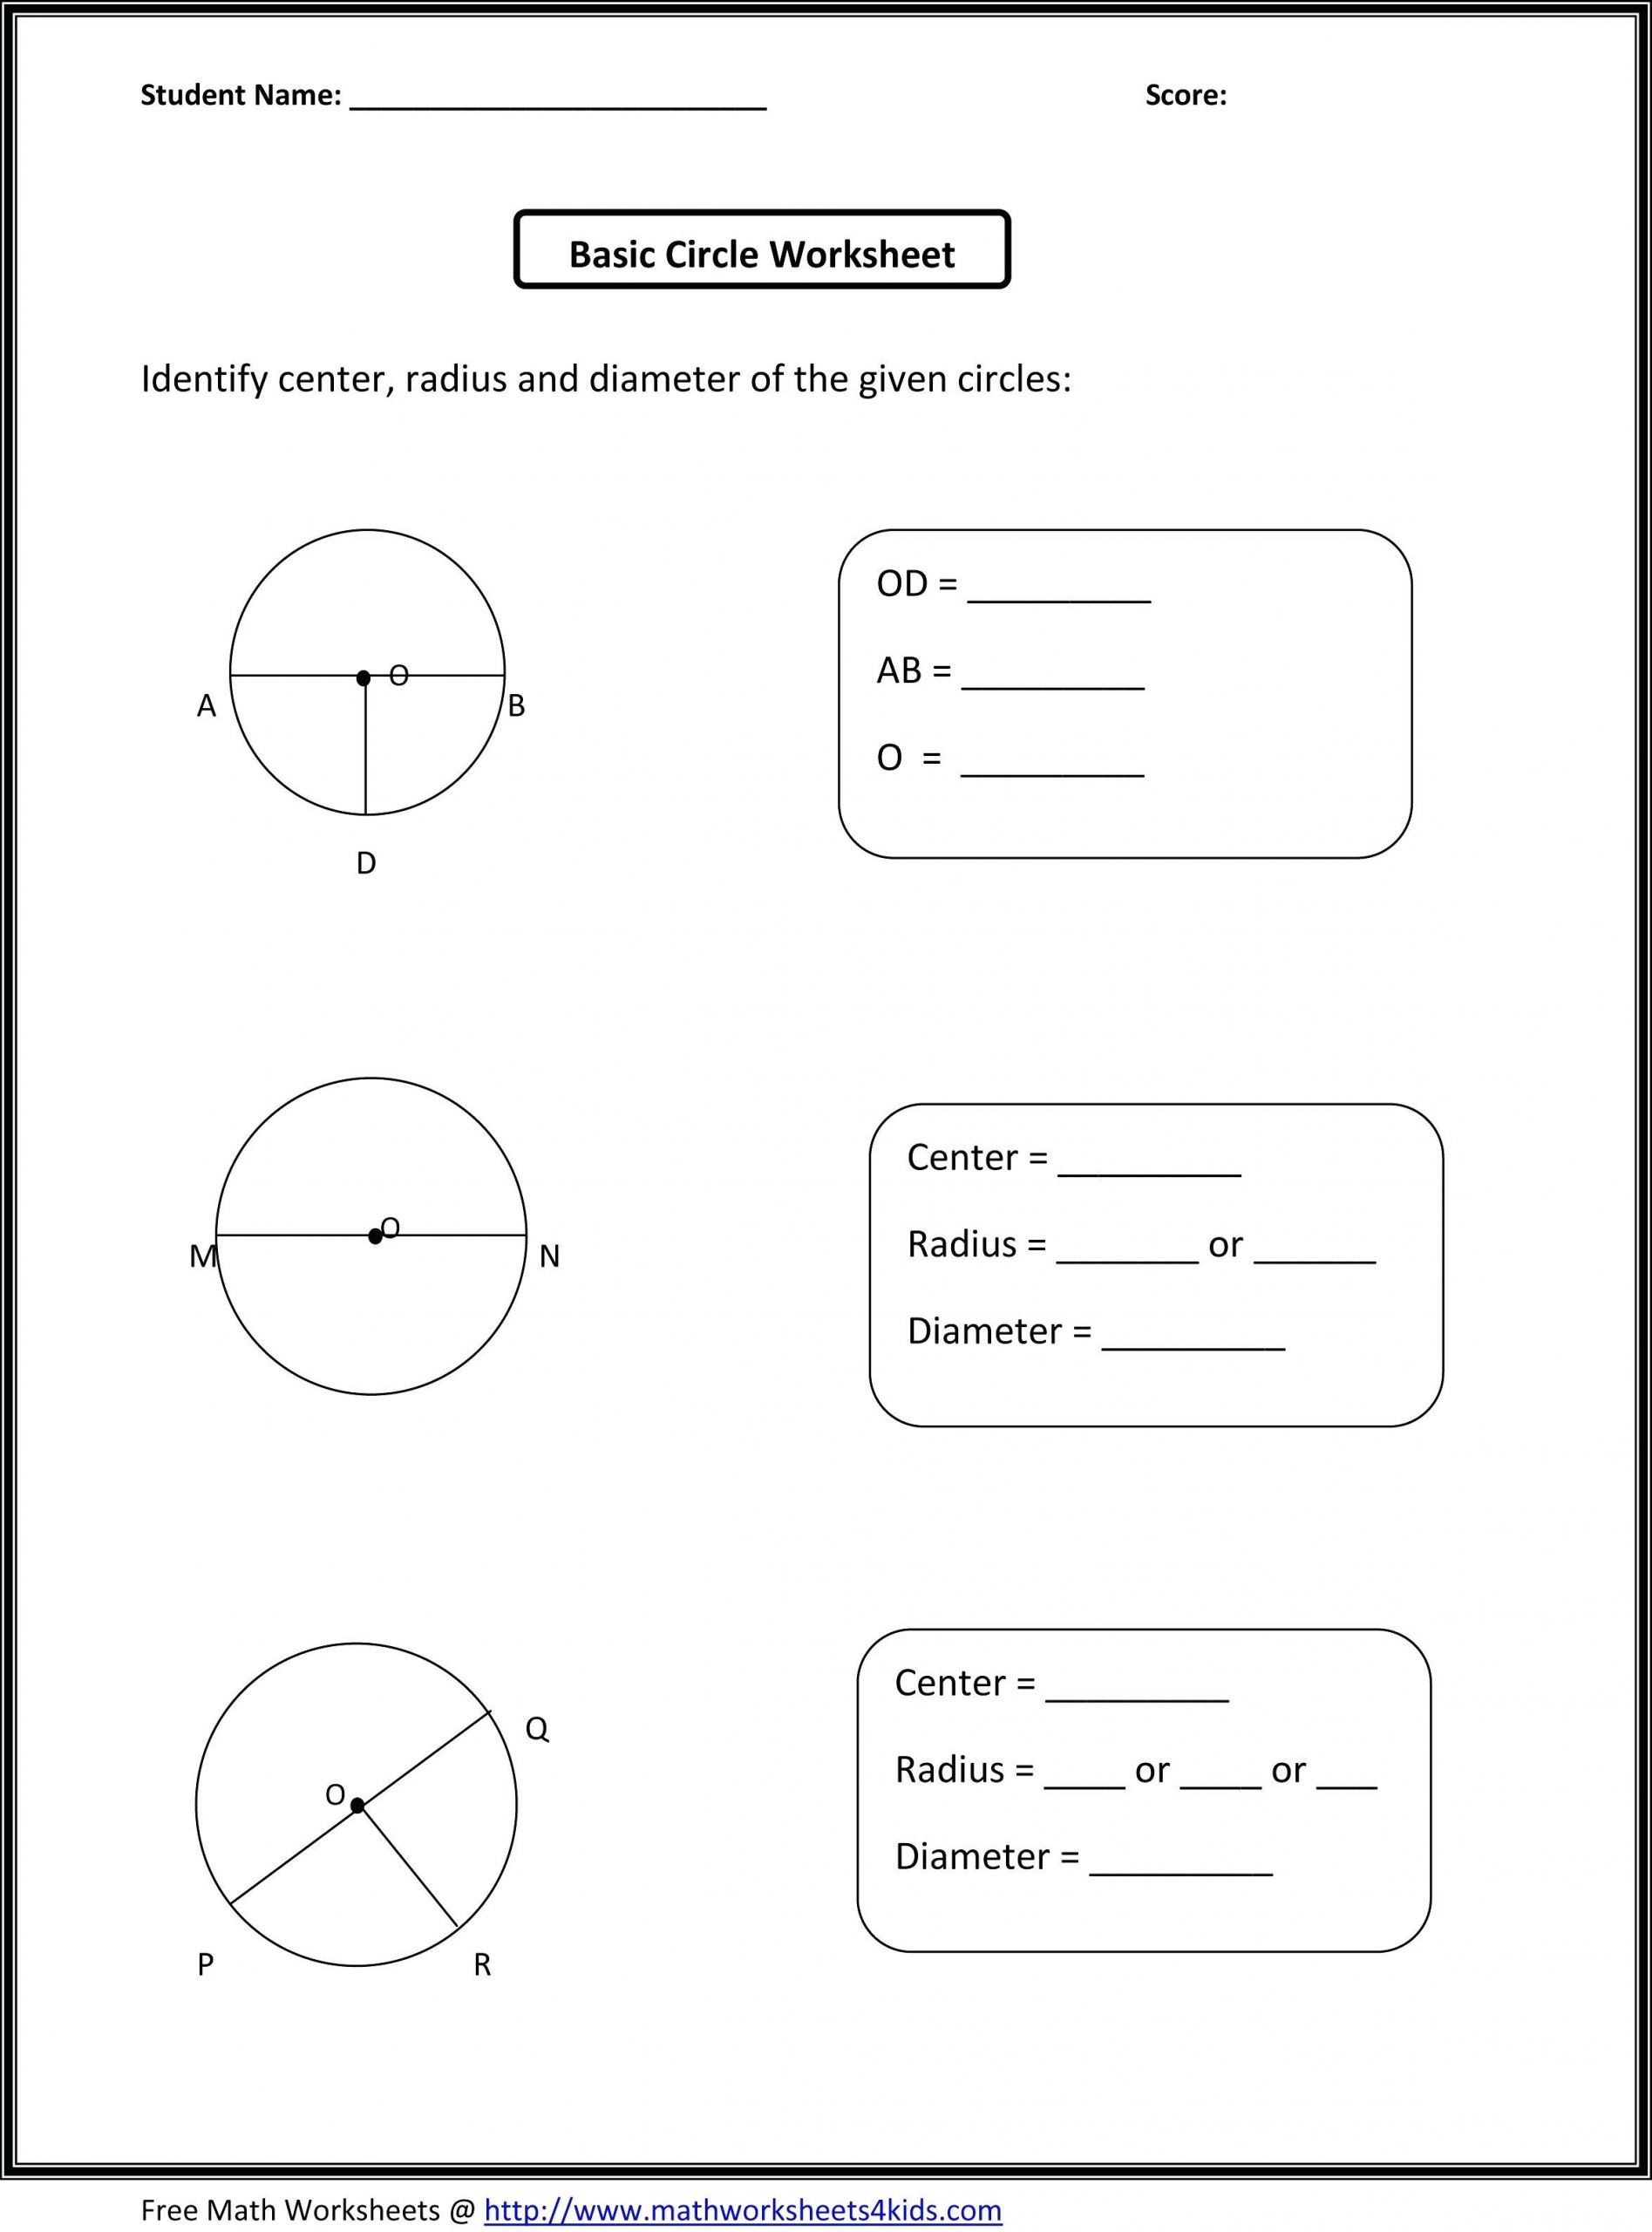 Free Math Worksheets Second Grade 2 Subtraction Subtract whole Hundreds From 3 Digit Numbers